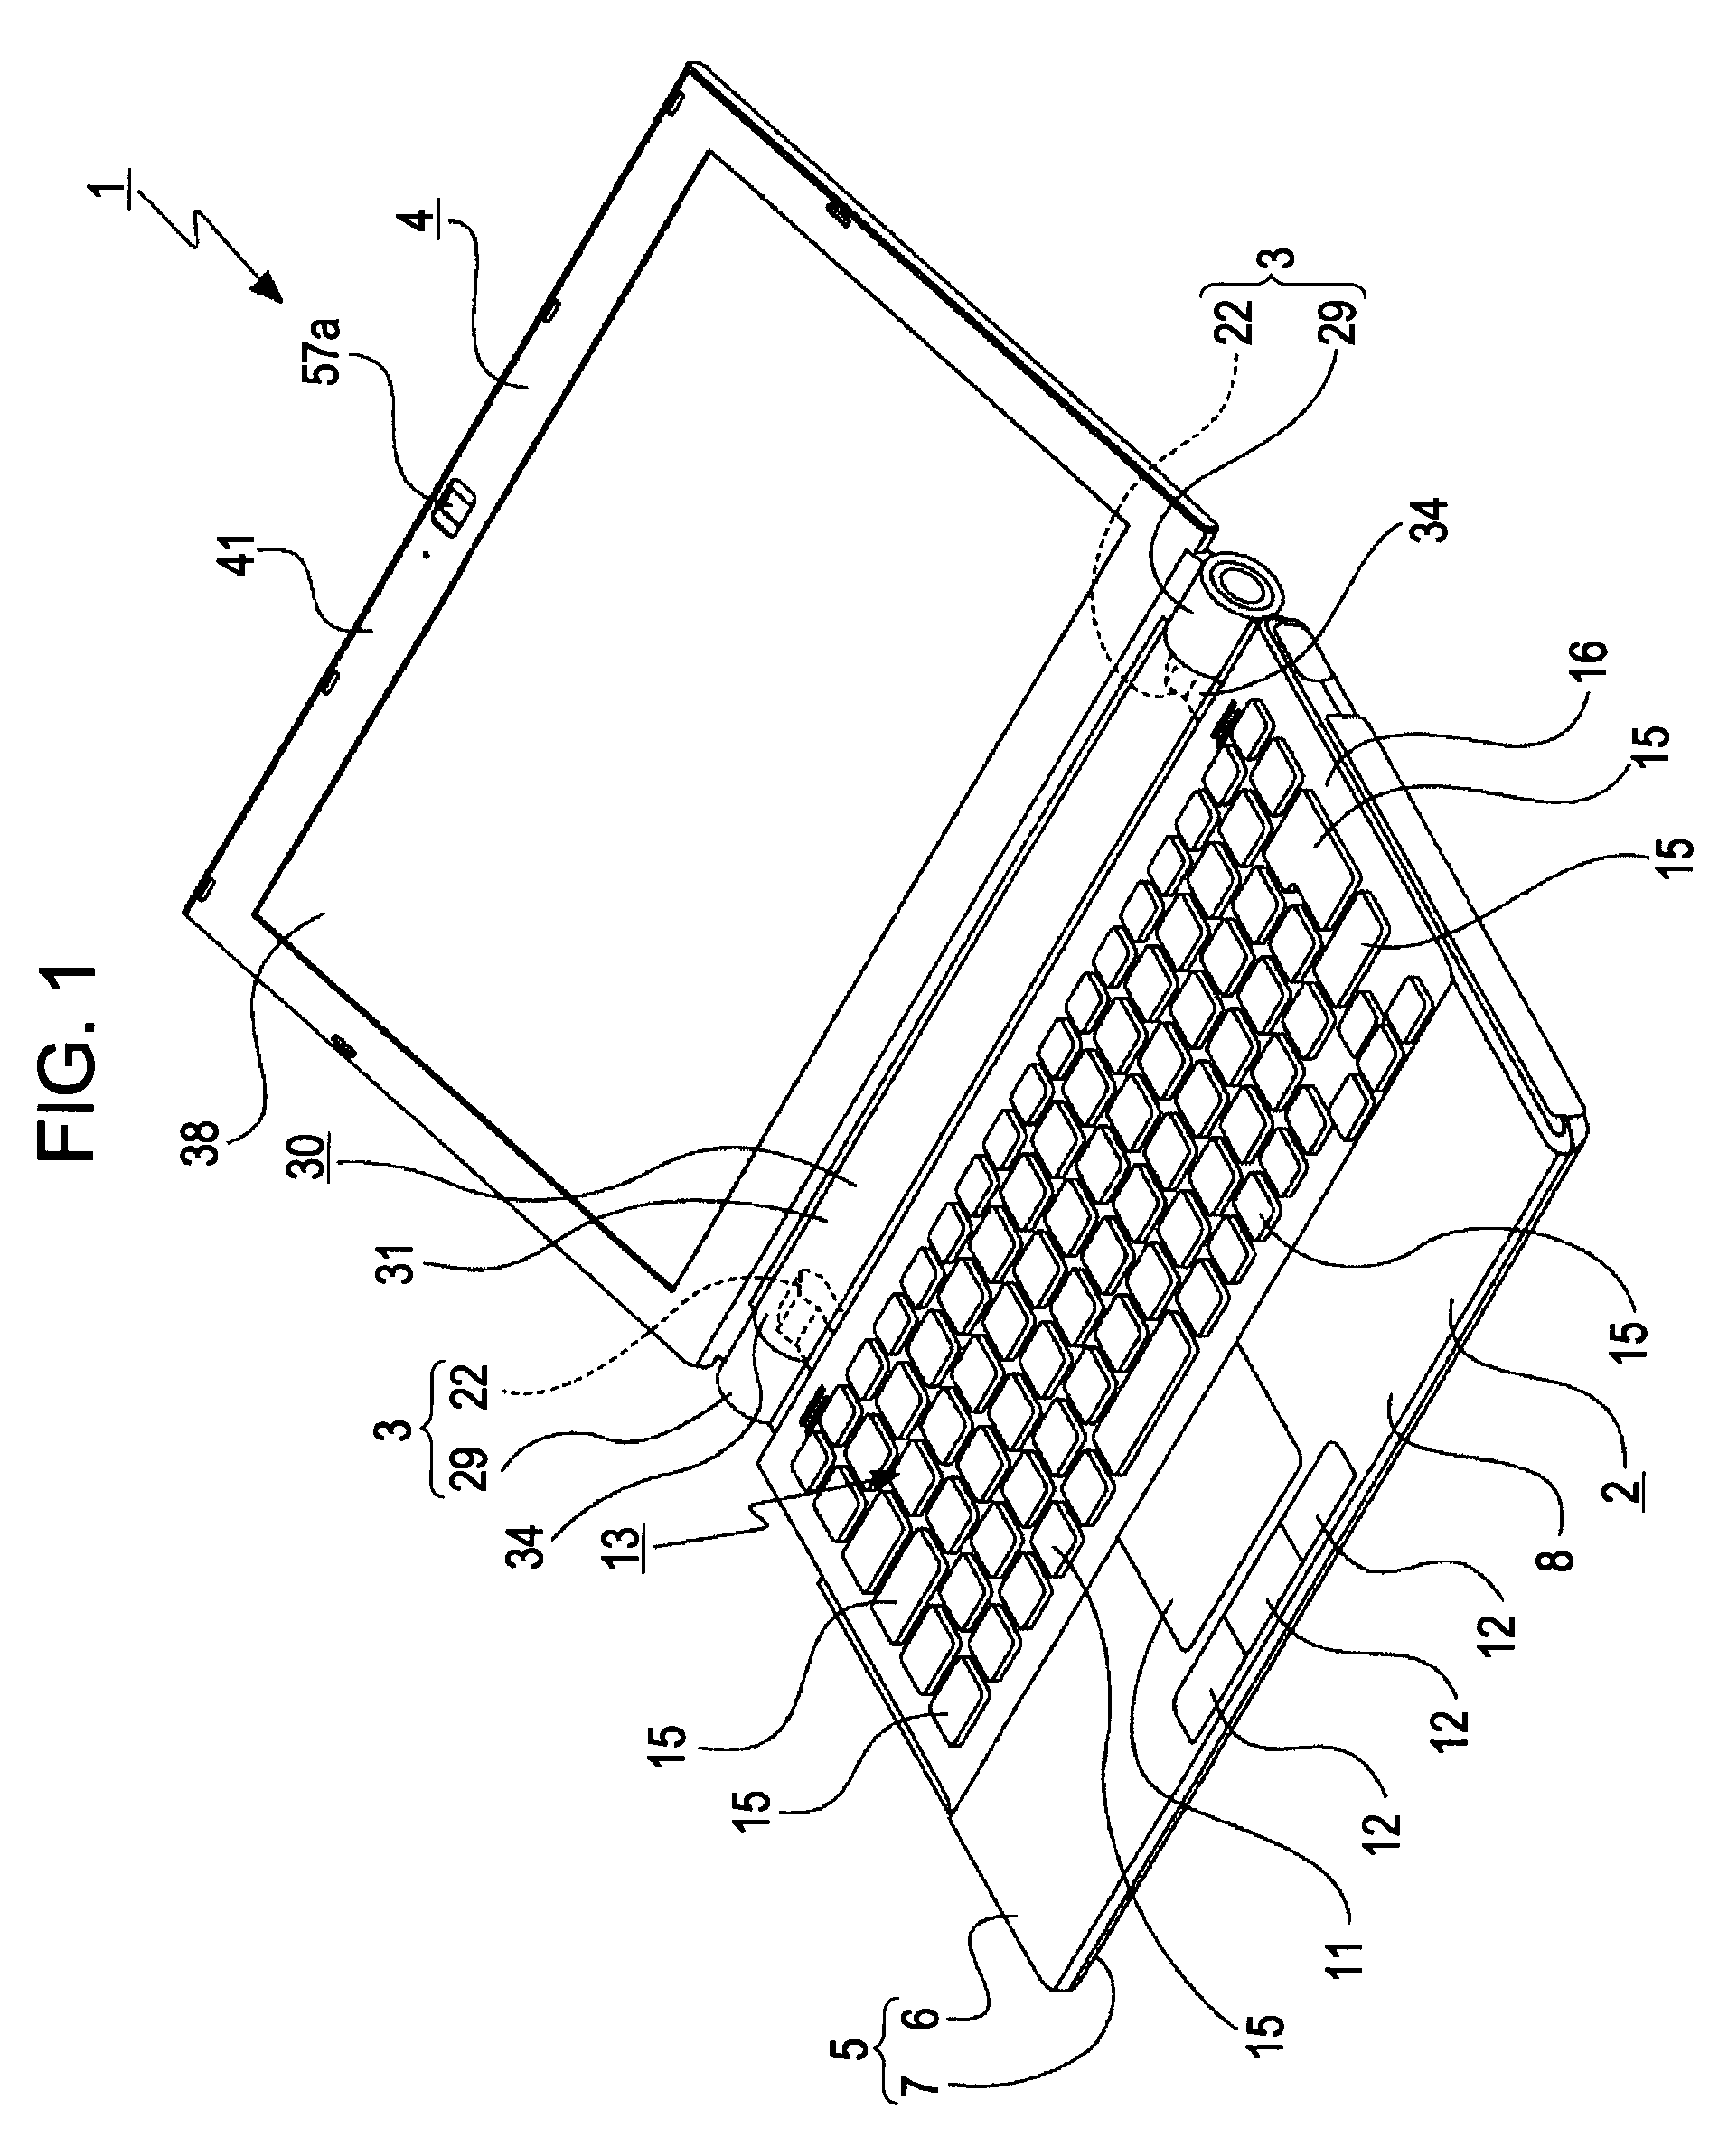 Keyboard connection configuration and electronic device